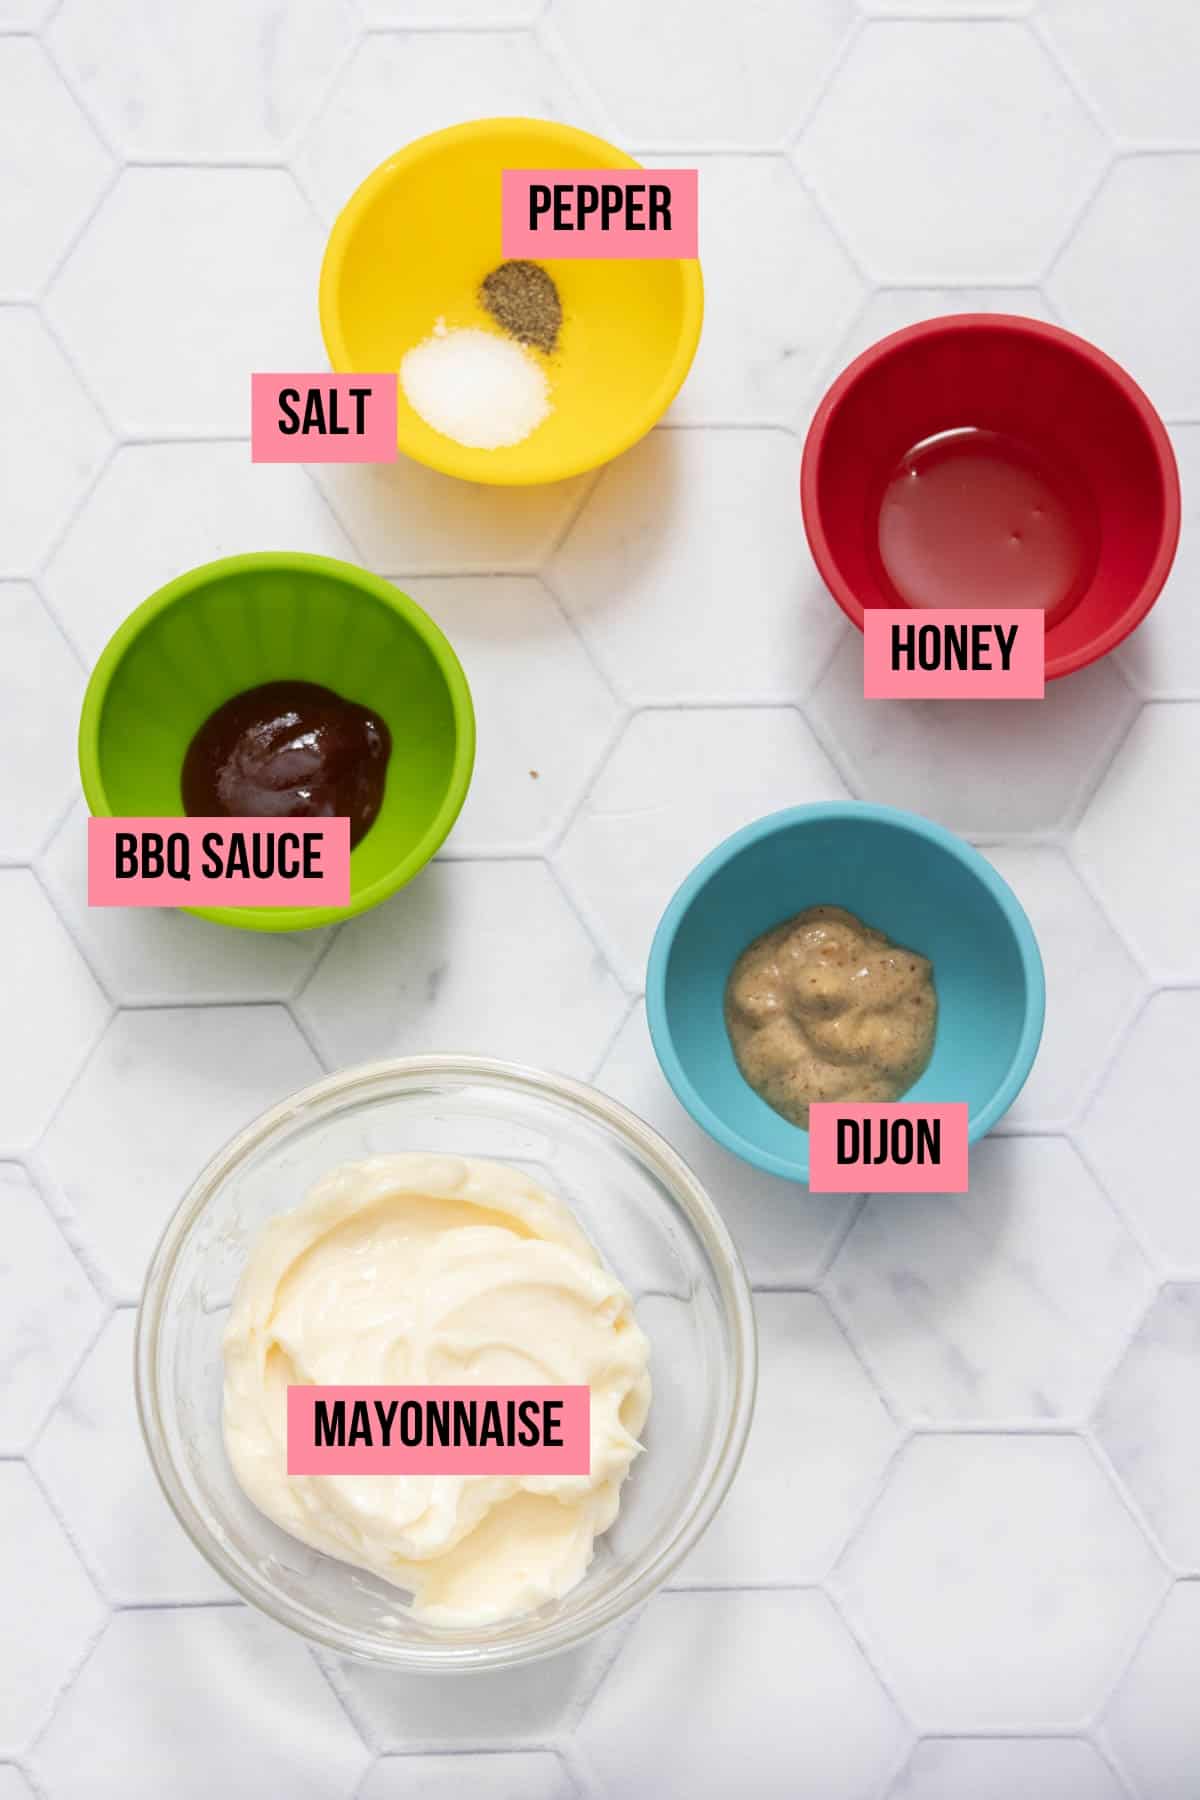 Ingredients for dipping sauce on a tile surface with labels.